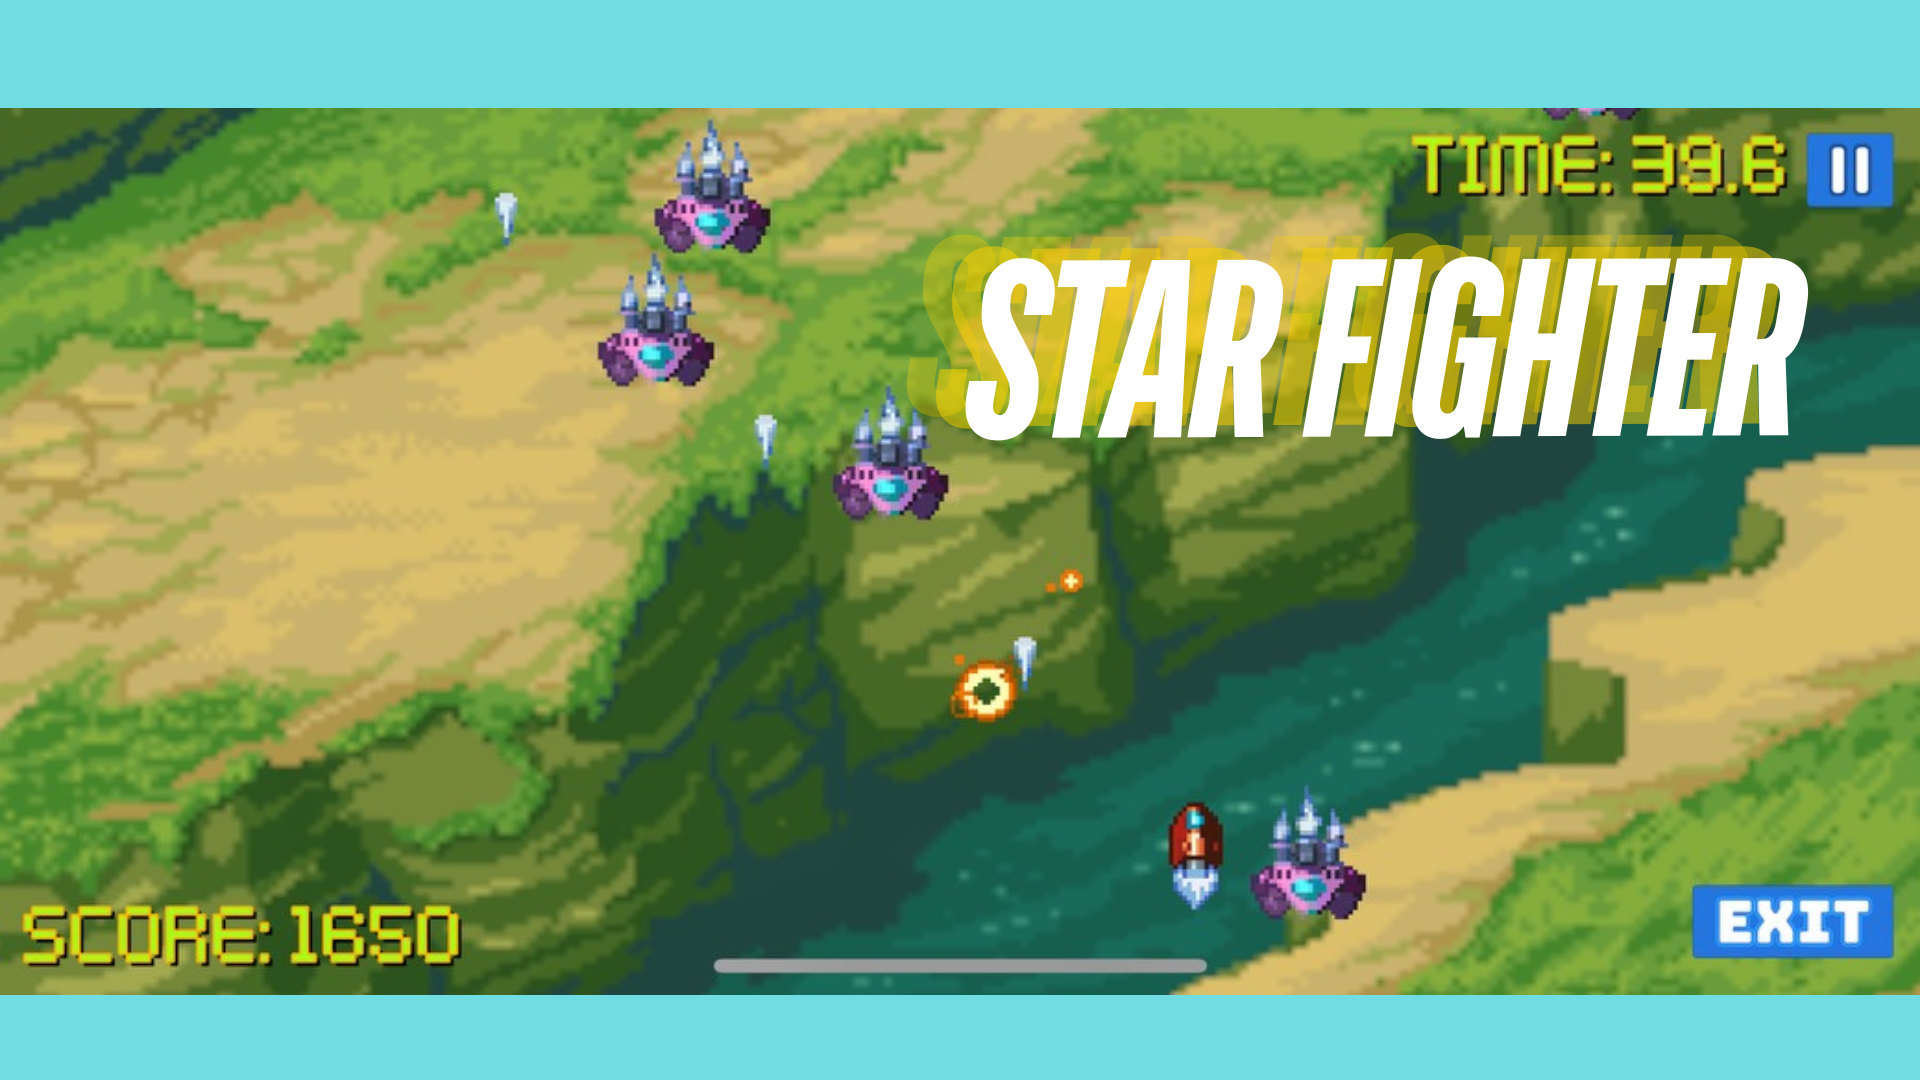 MOVAO Mini Exergaming includes the game Star Fighter! Challenge yourself while achieving your goals.  A laser sensor detects the leg movement and syncs to our MOVAO Play App. 